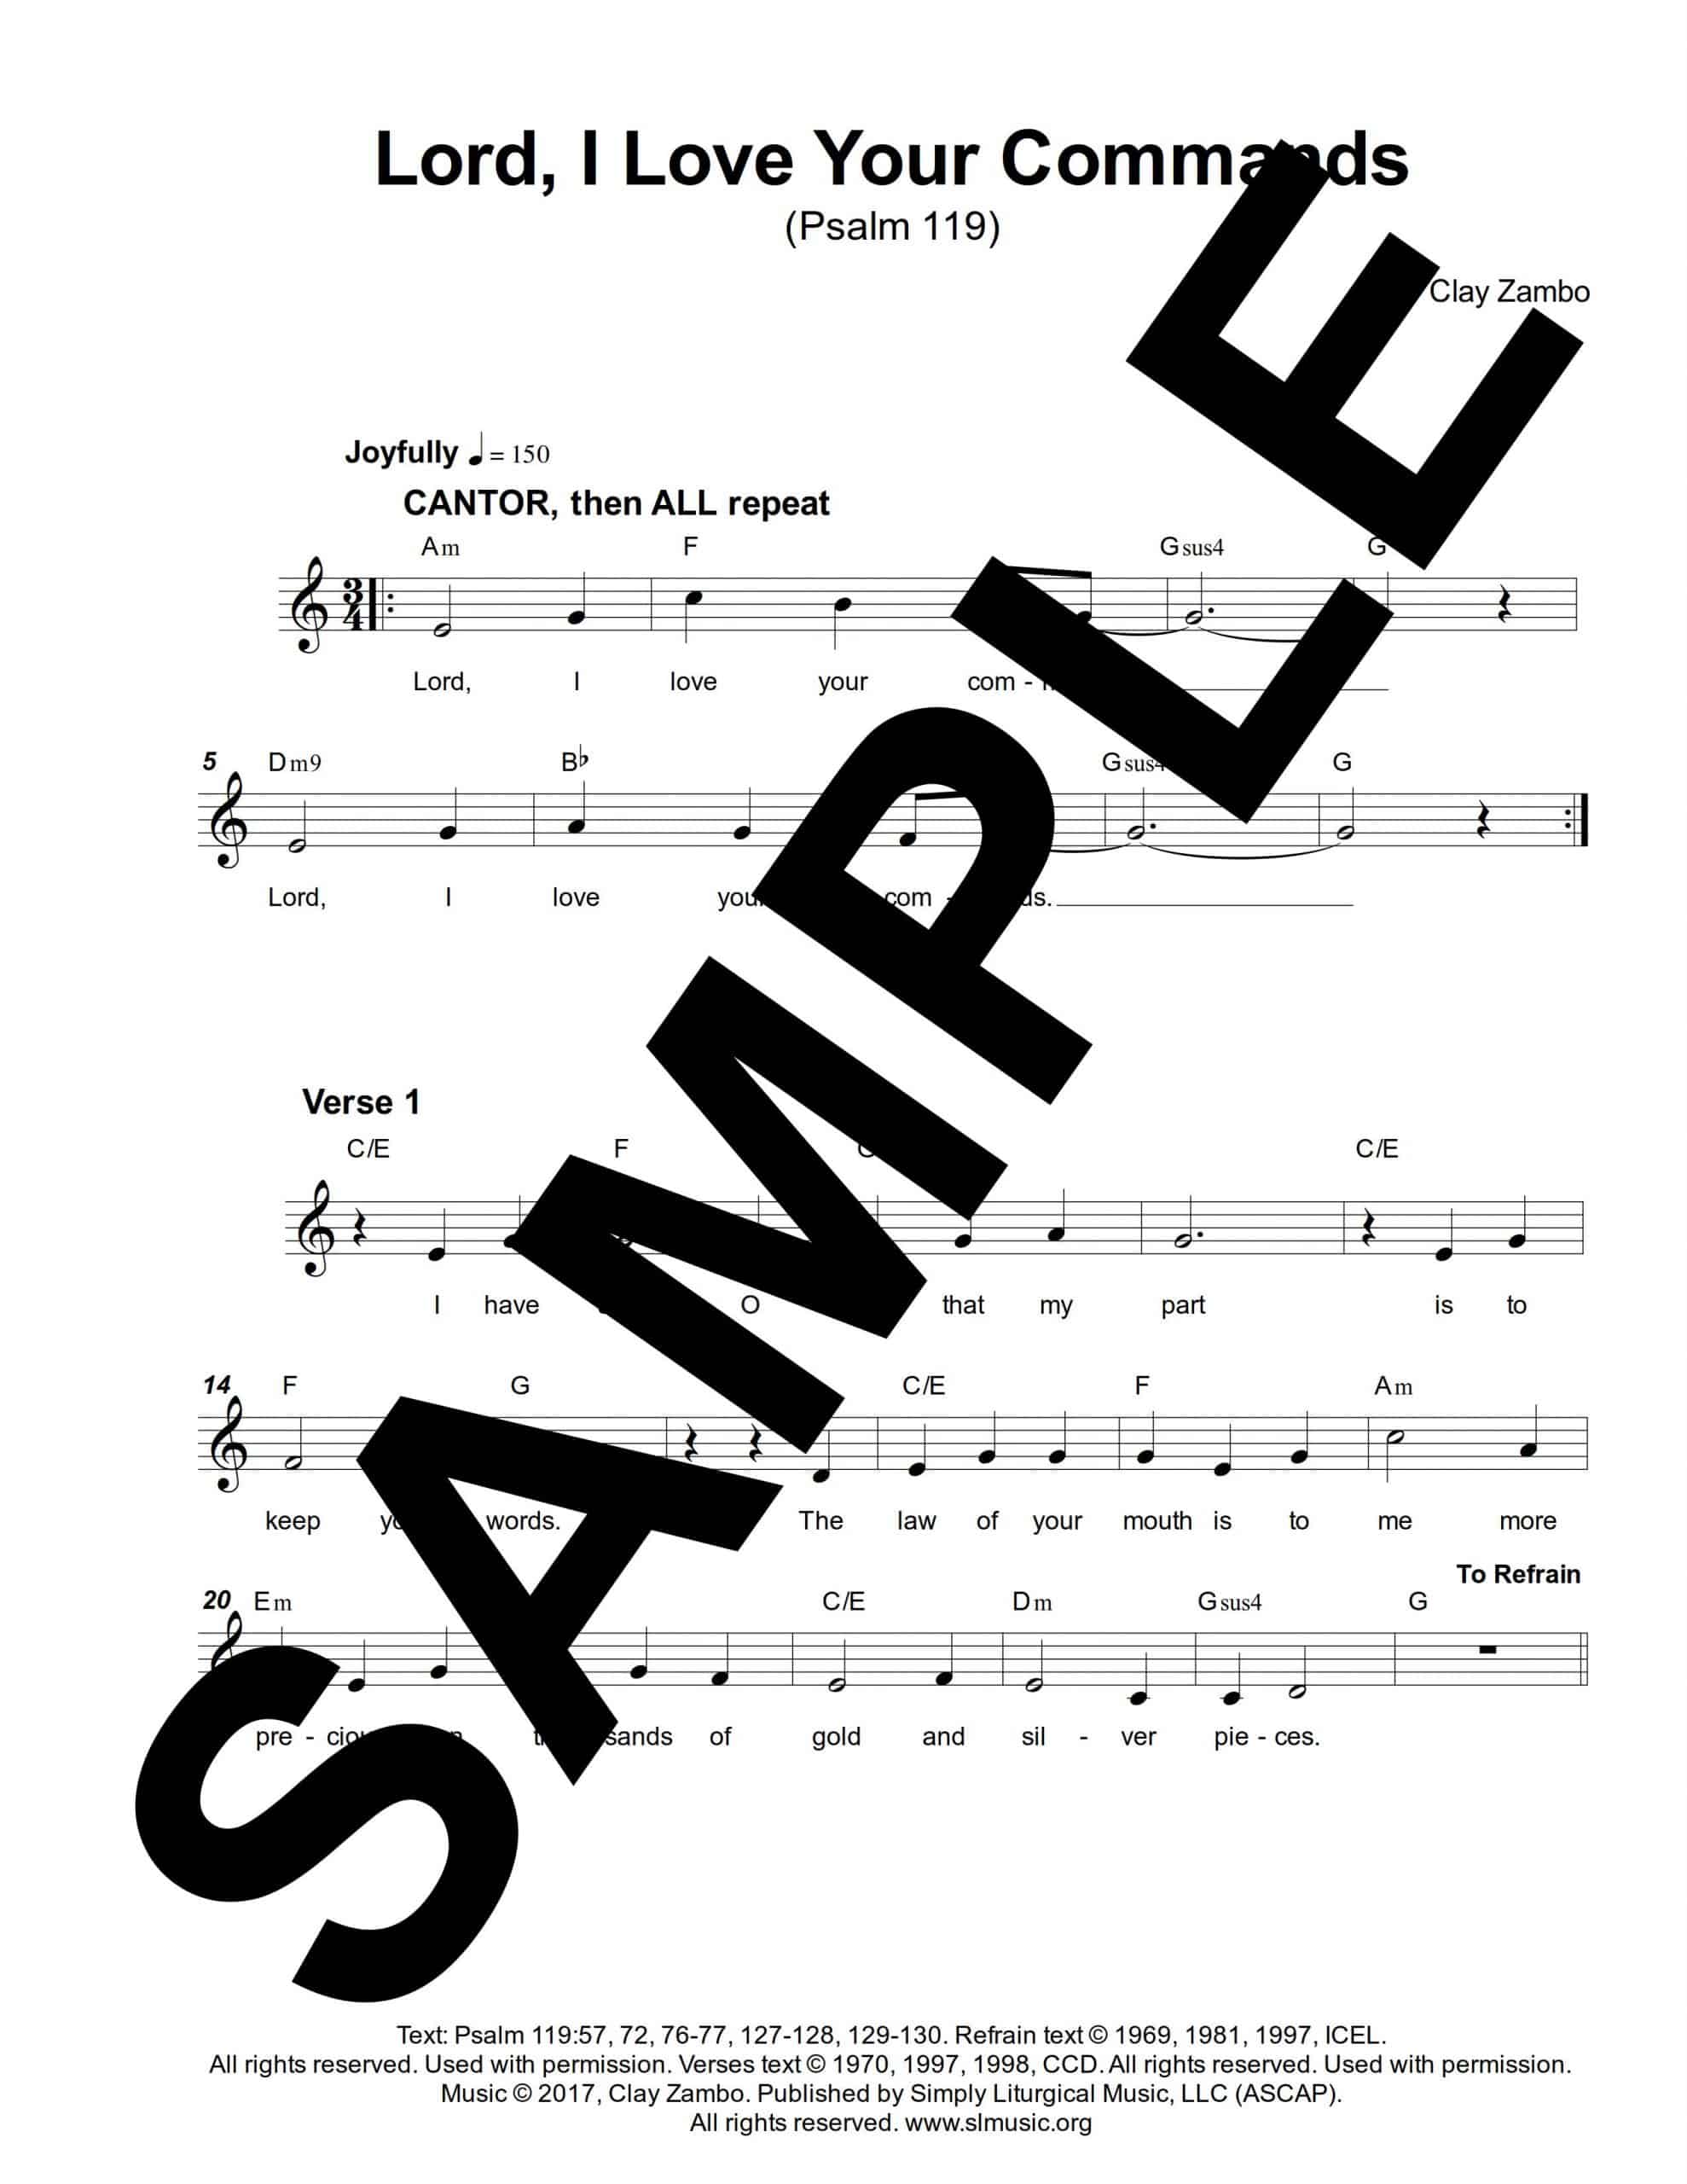 Psalm 119 – Lord, I Love Your Commands (Zambo)